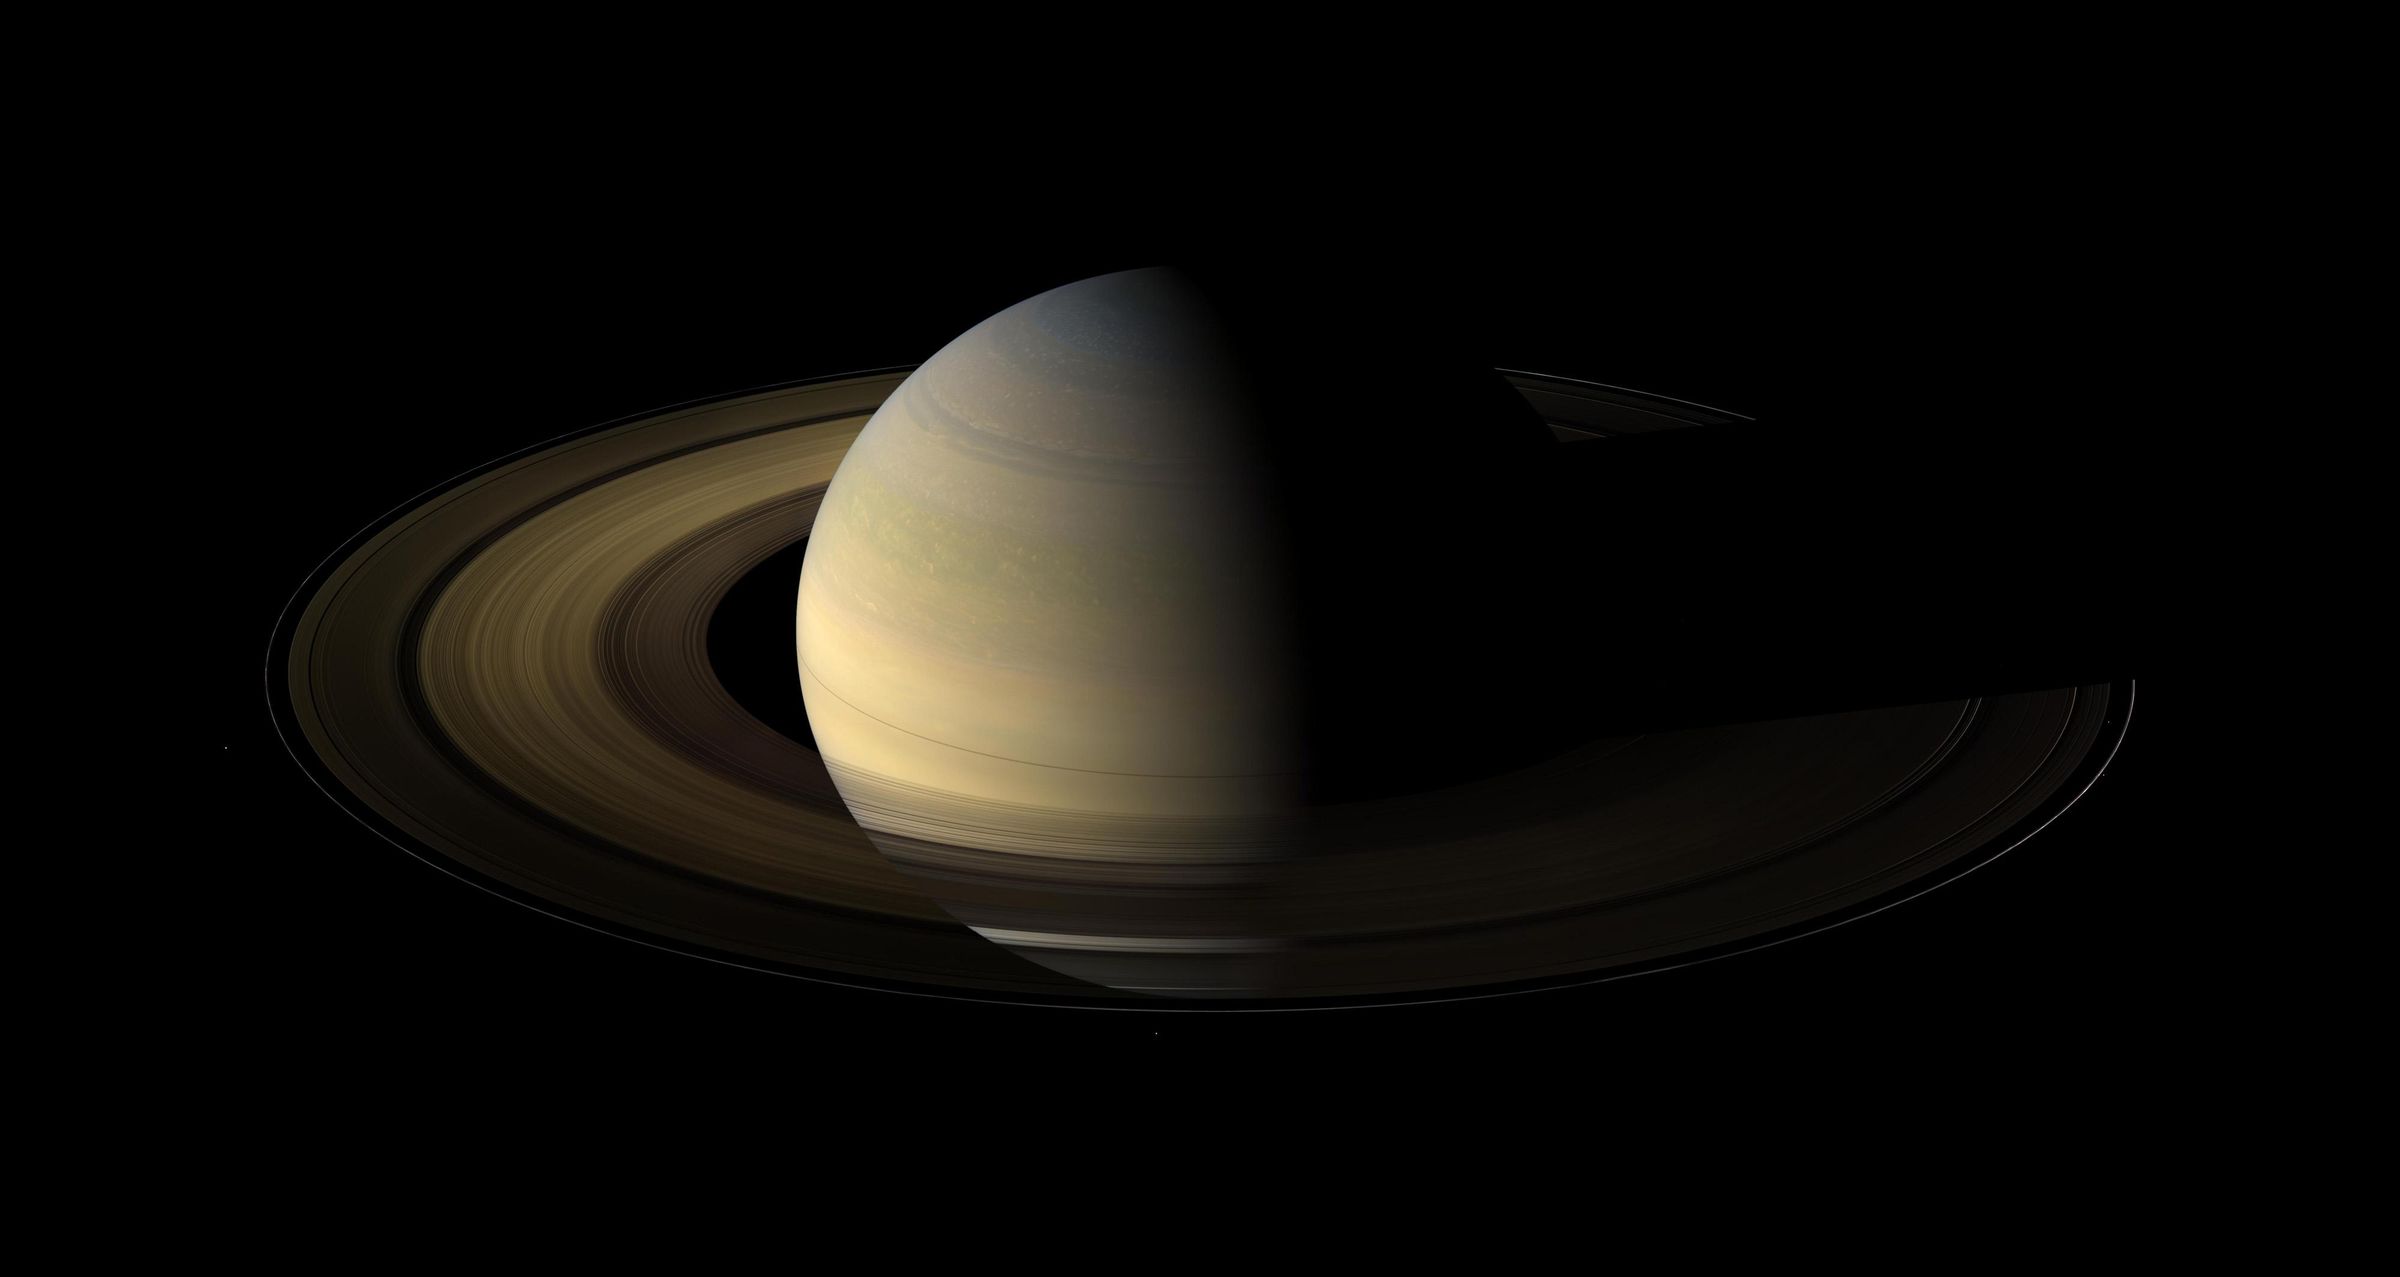 Saturn’s equinox, photographed on August 12th, 2009.